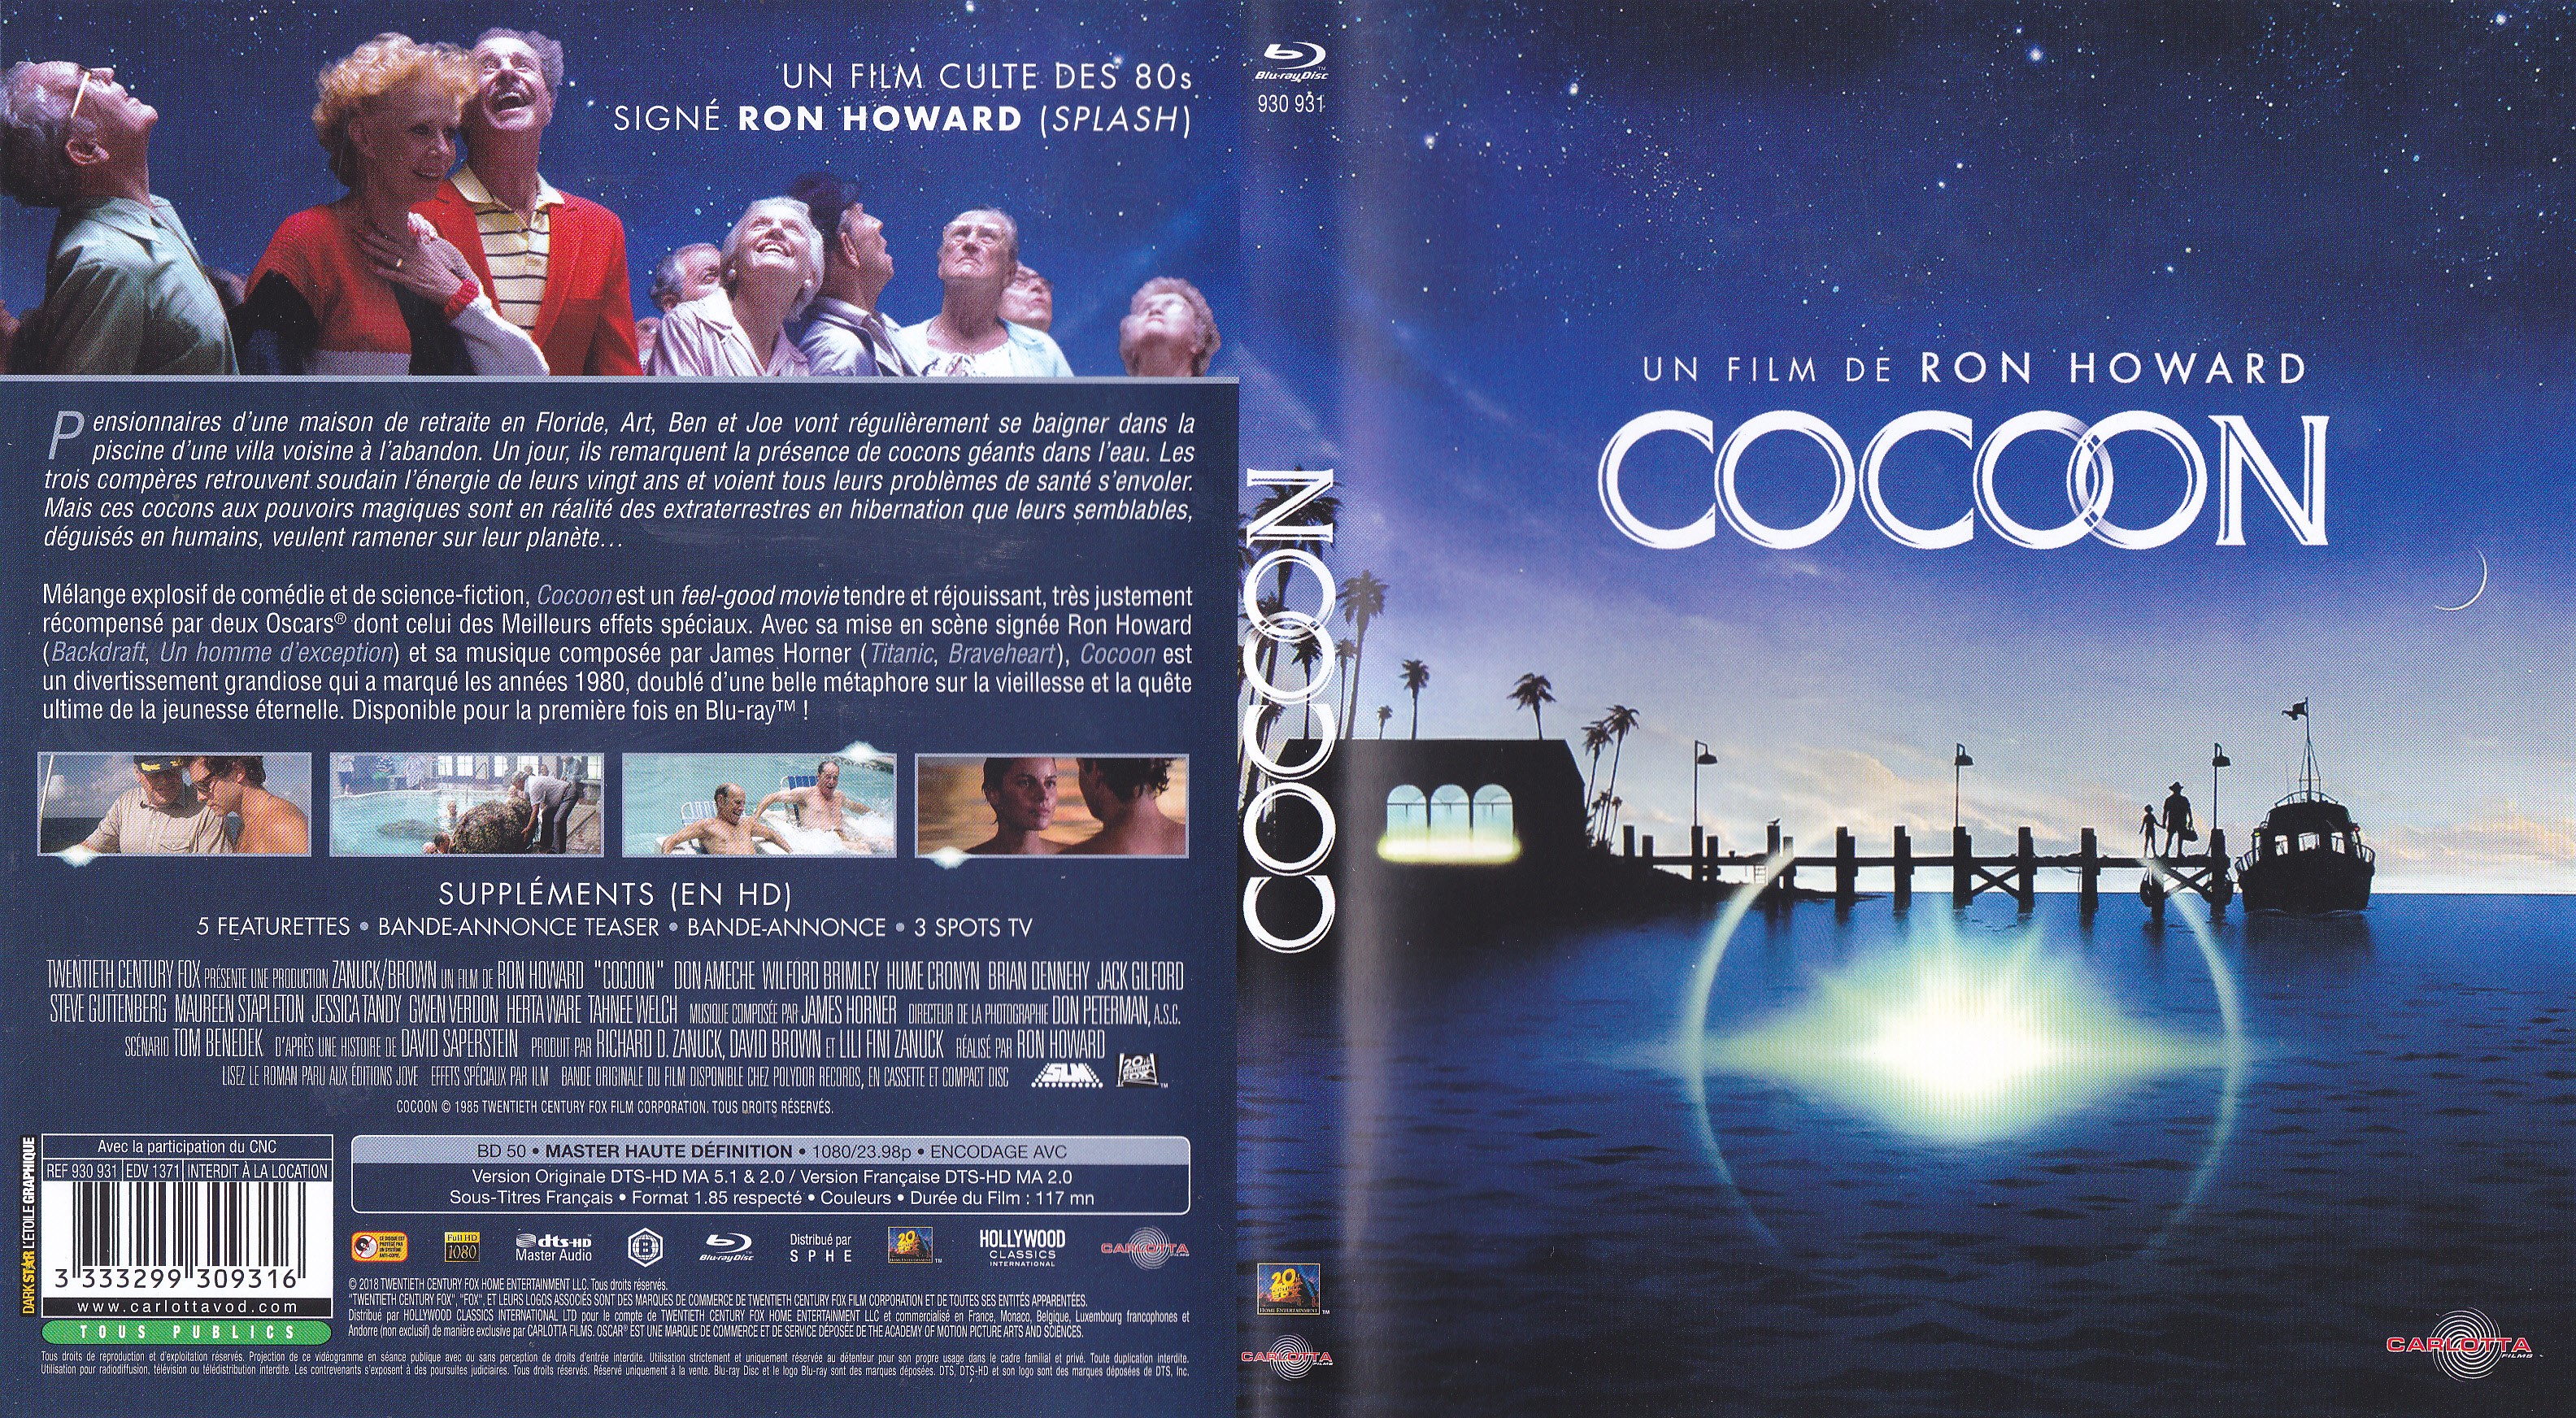 Jaquette DVD Cocoon (BLU-RAY) v2